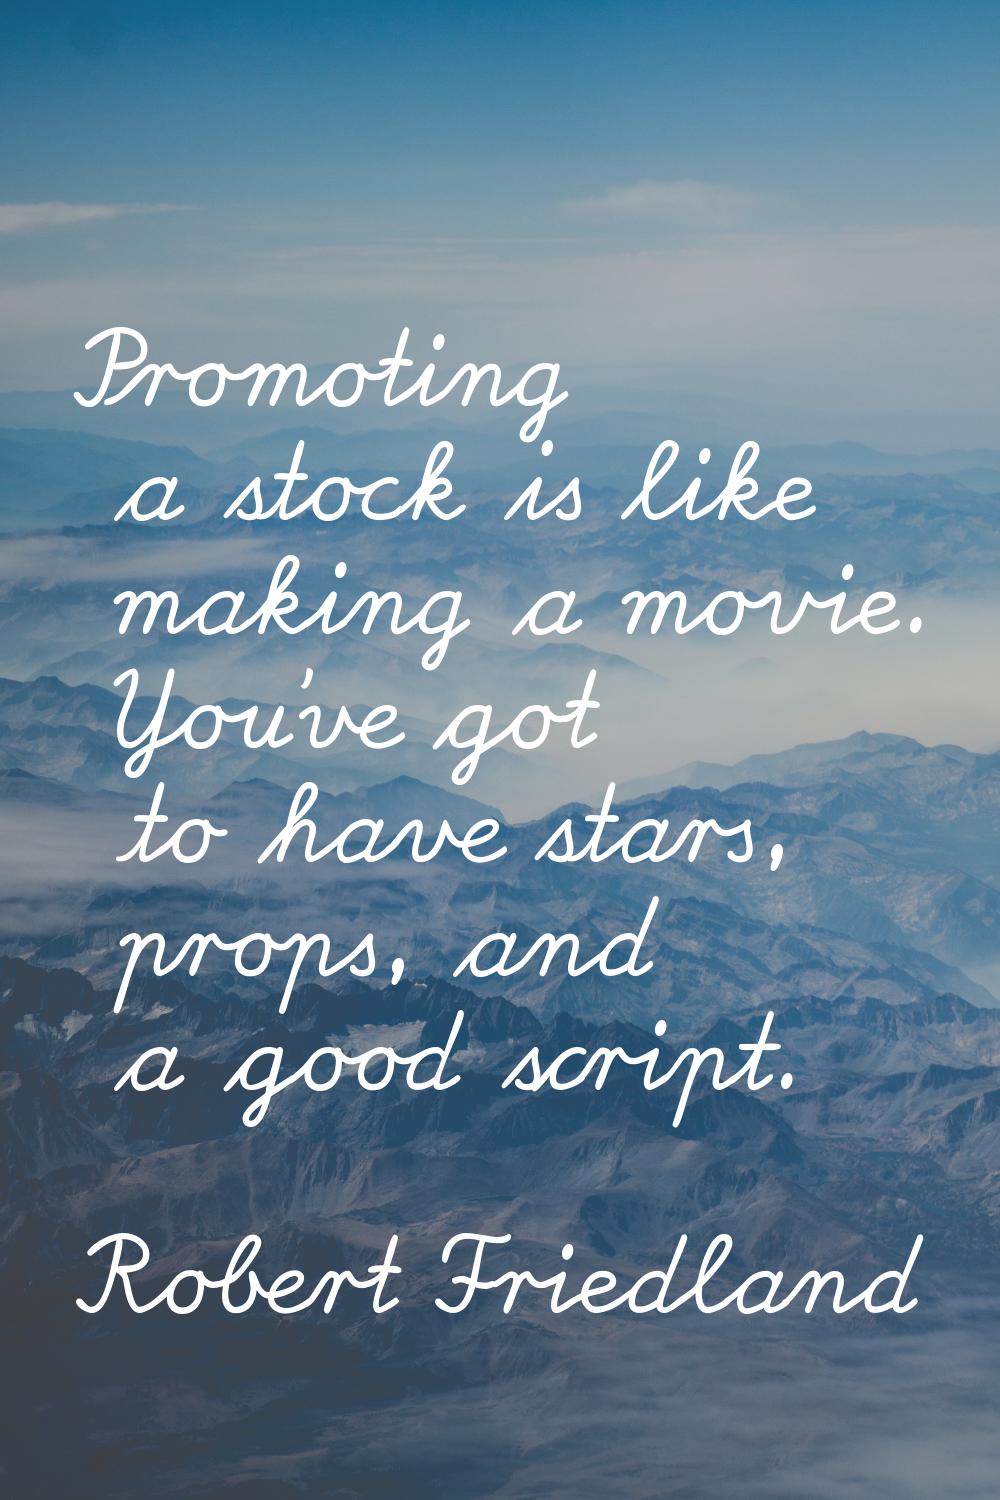 Promoting a stock is like making a movie. You've got to have stars, props, and a good script.